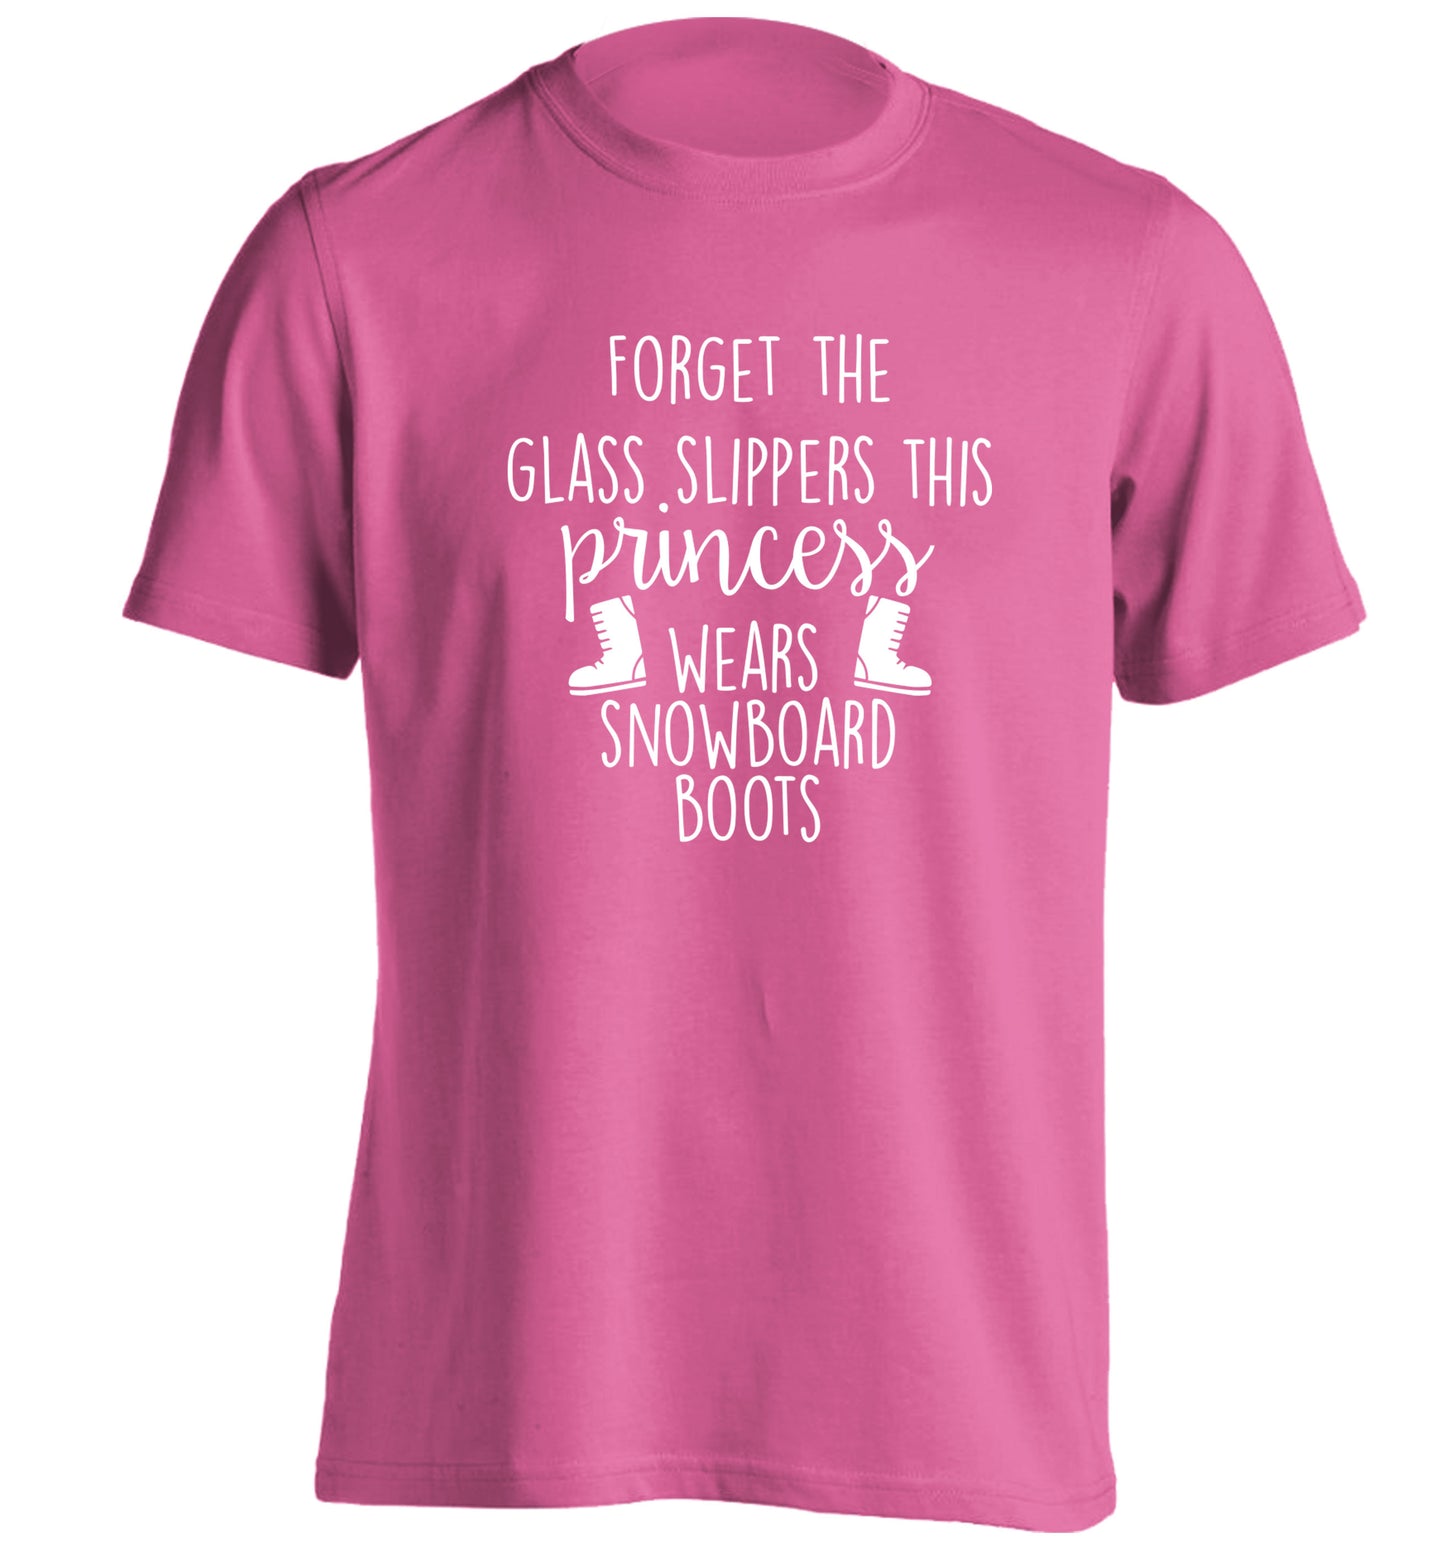 Forget the glass slippers this princess wears snowboard boots adults unisex pink Tshirt 2XL